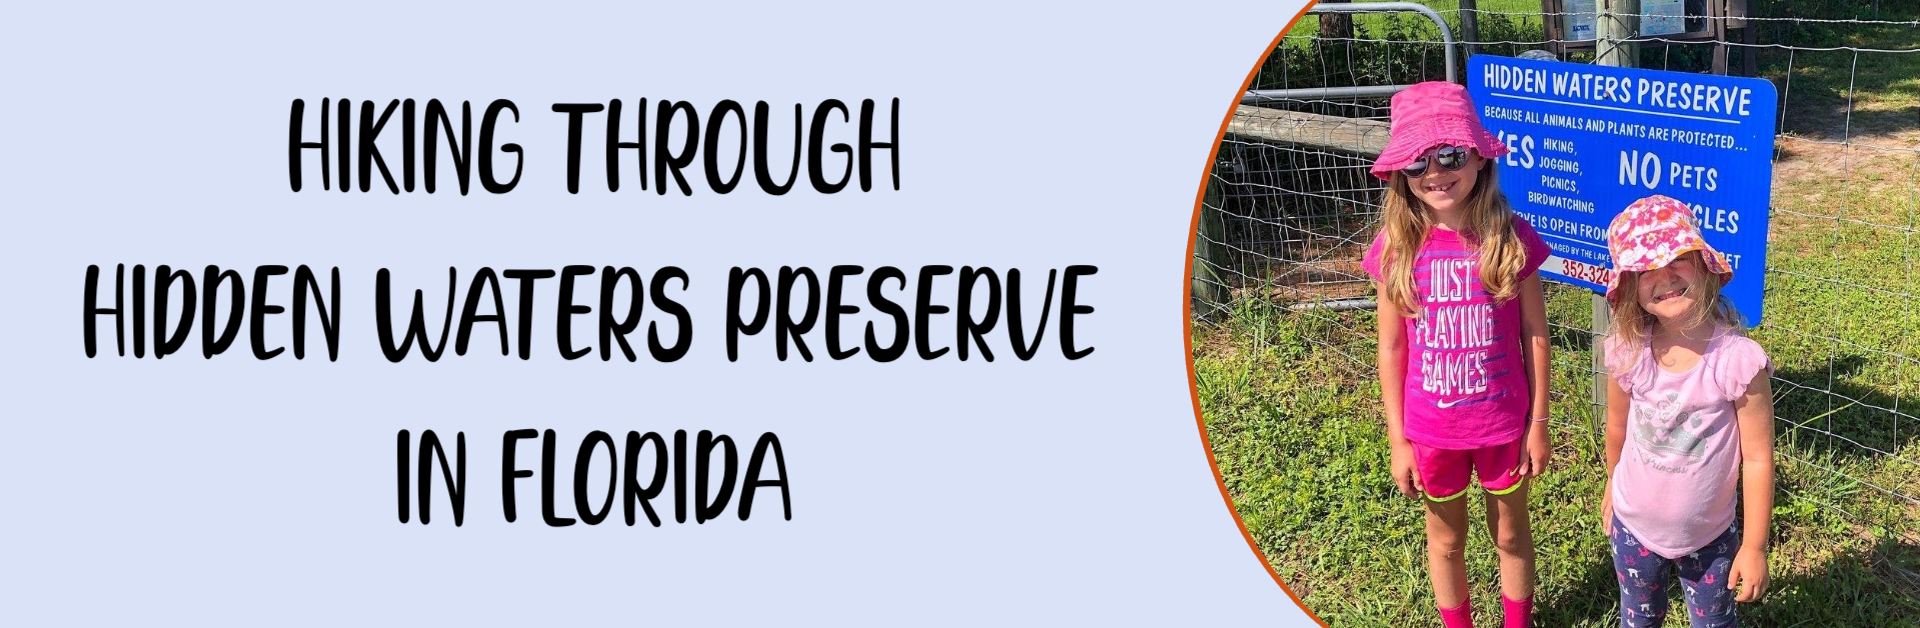 Hiking Through Hidden Waters Preserve In Florida Featured